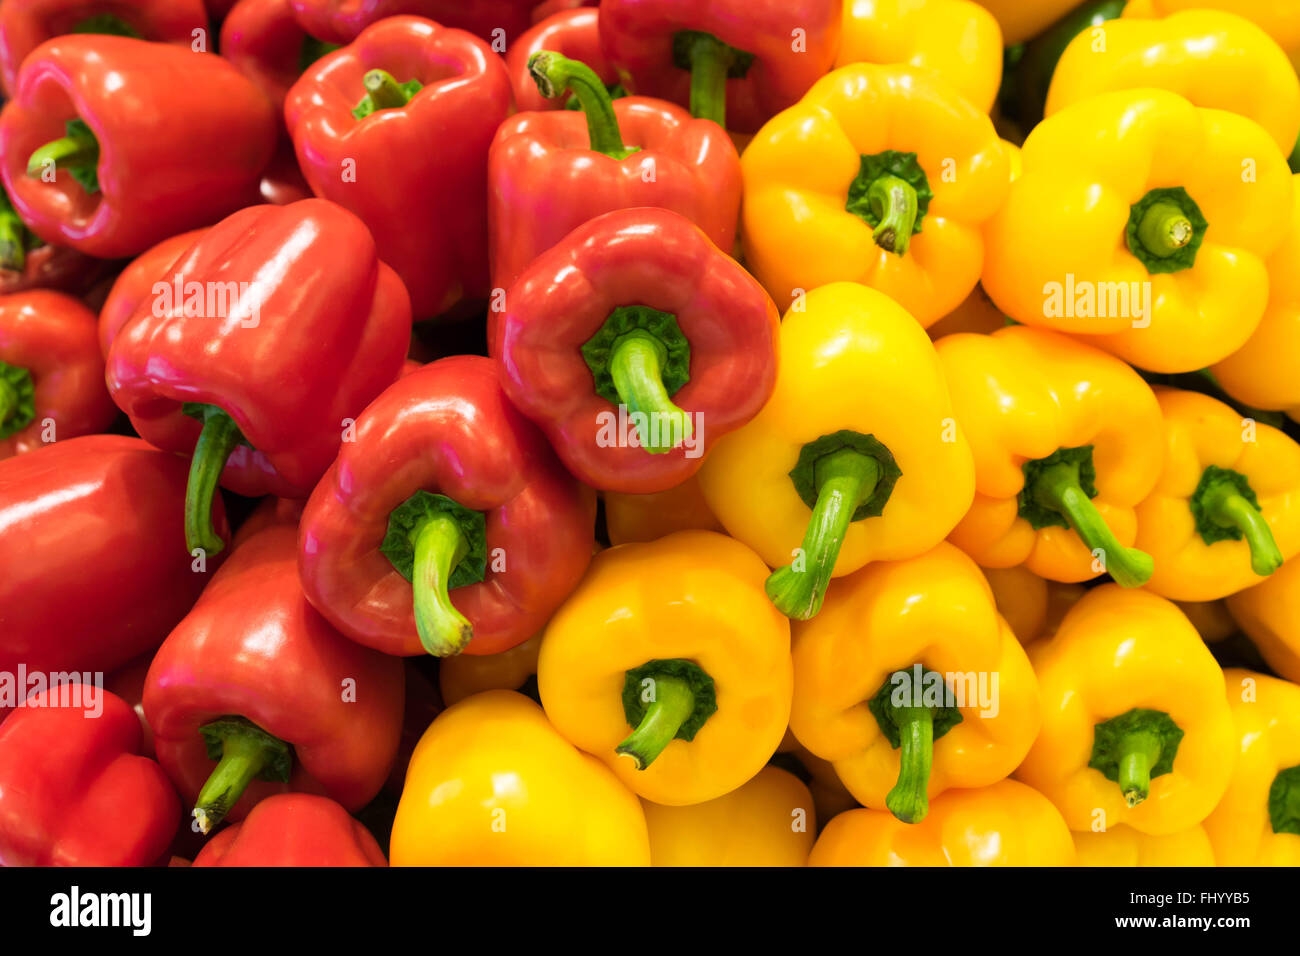 Red and yellow bell peppers (capsicum) background Stock Photo